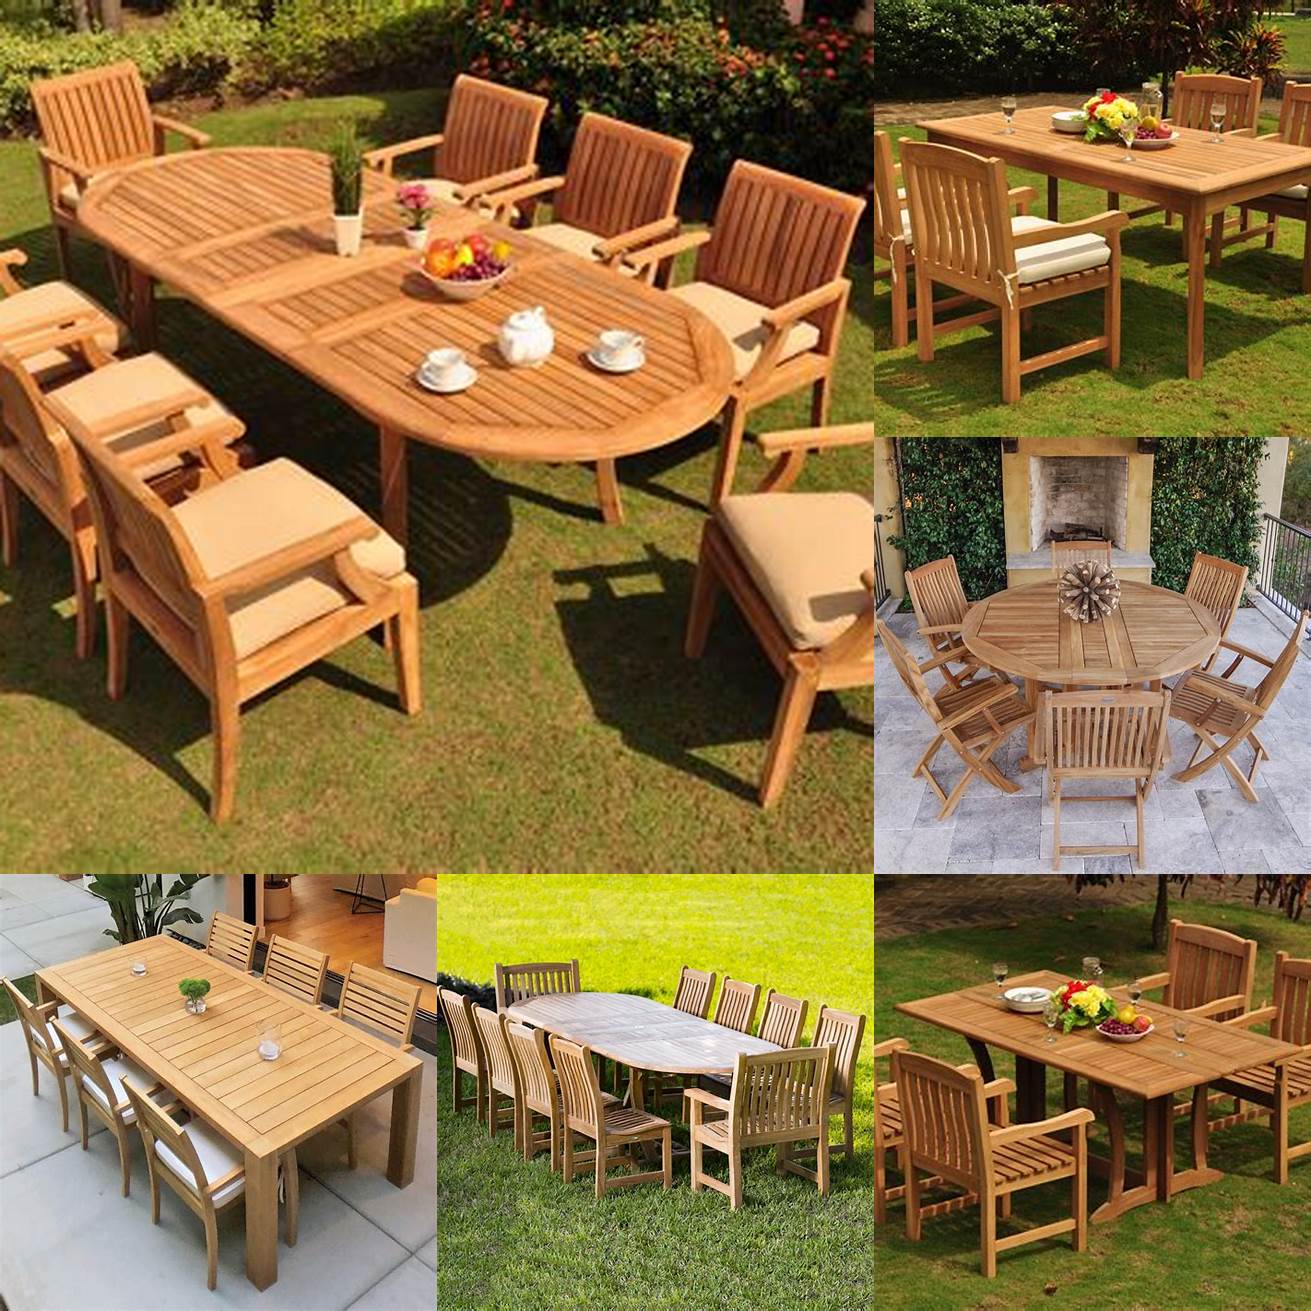 A teak dining table in an outdoor setting